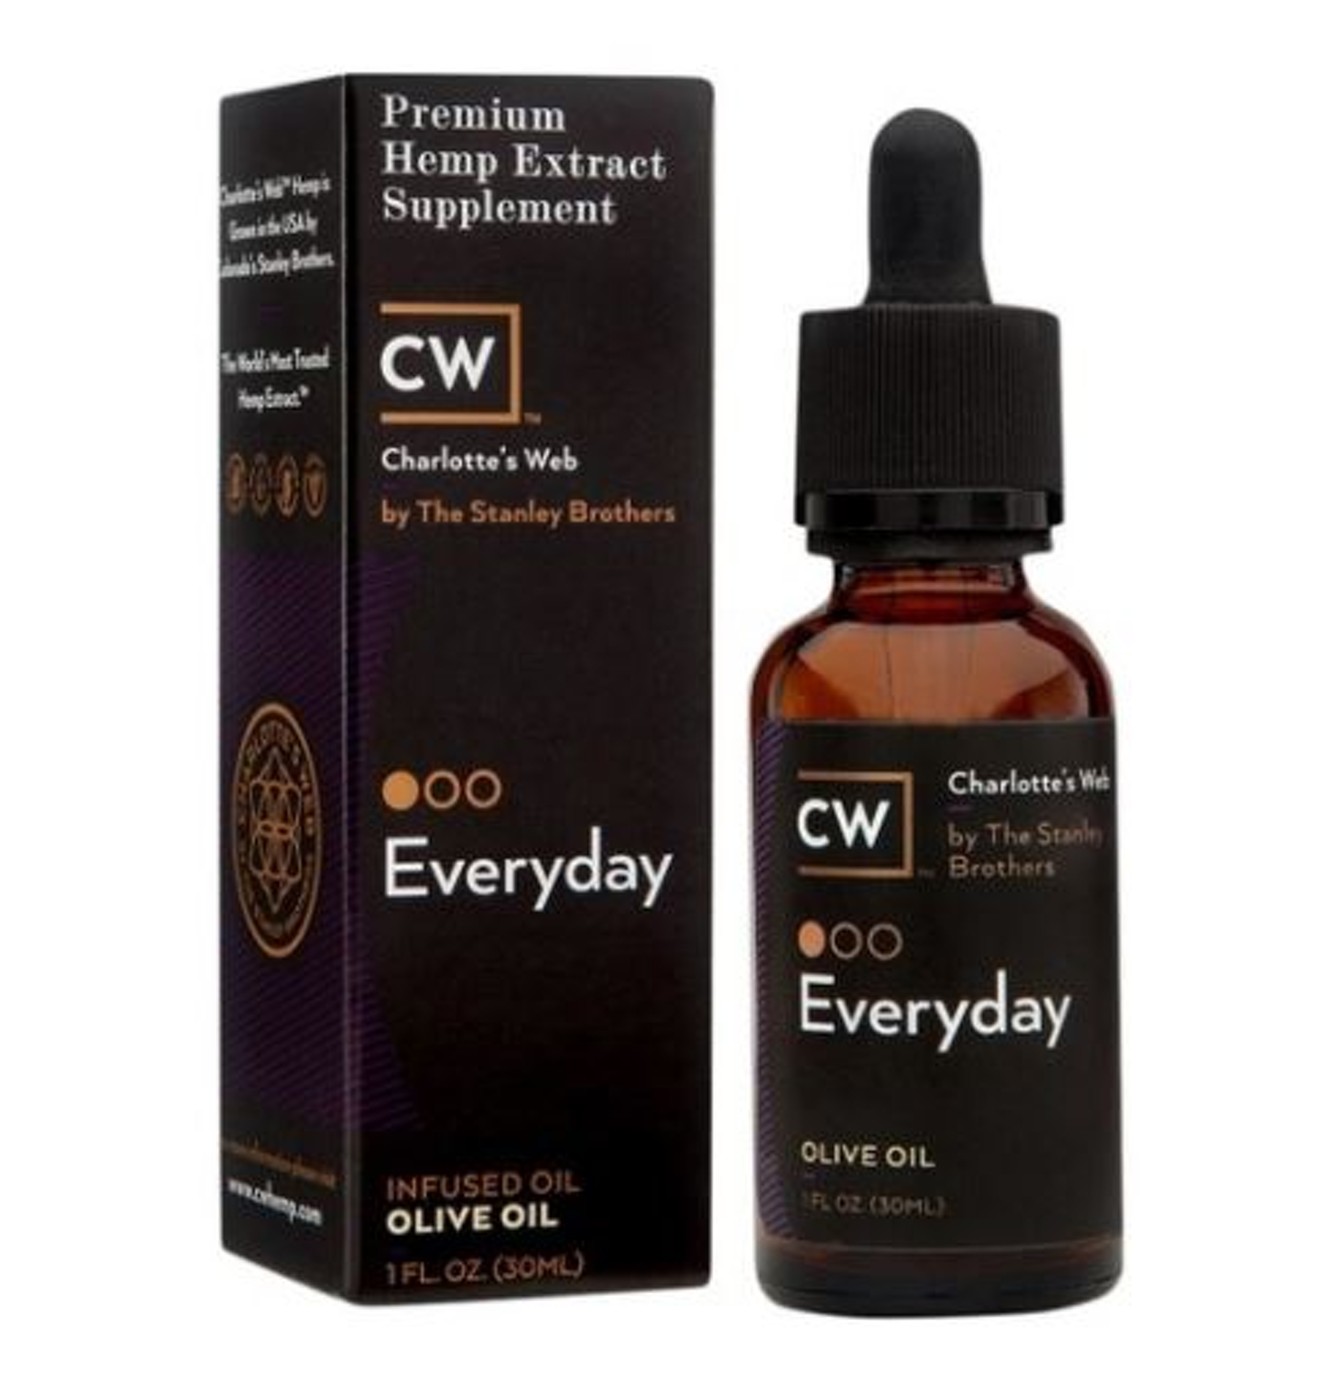 Charlotte's Web hemp extract, which contains cannabidiol, is sold on Target's website.